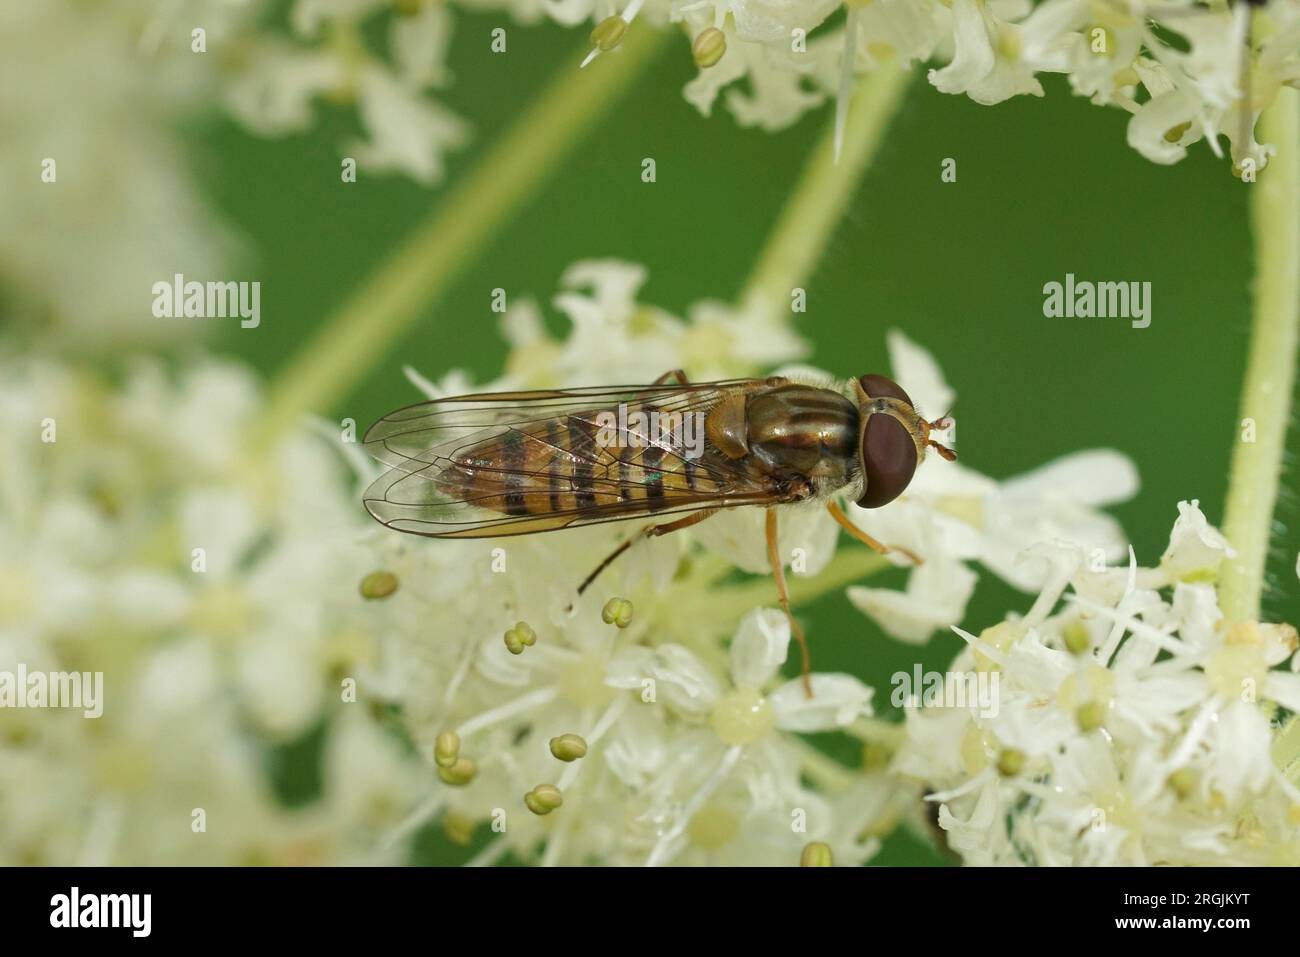 Natural closeup on a small marmalade hoverfly, Episyrphus balteatus sitting on a white flower Stock Photo